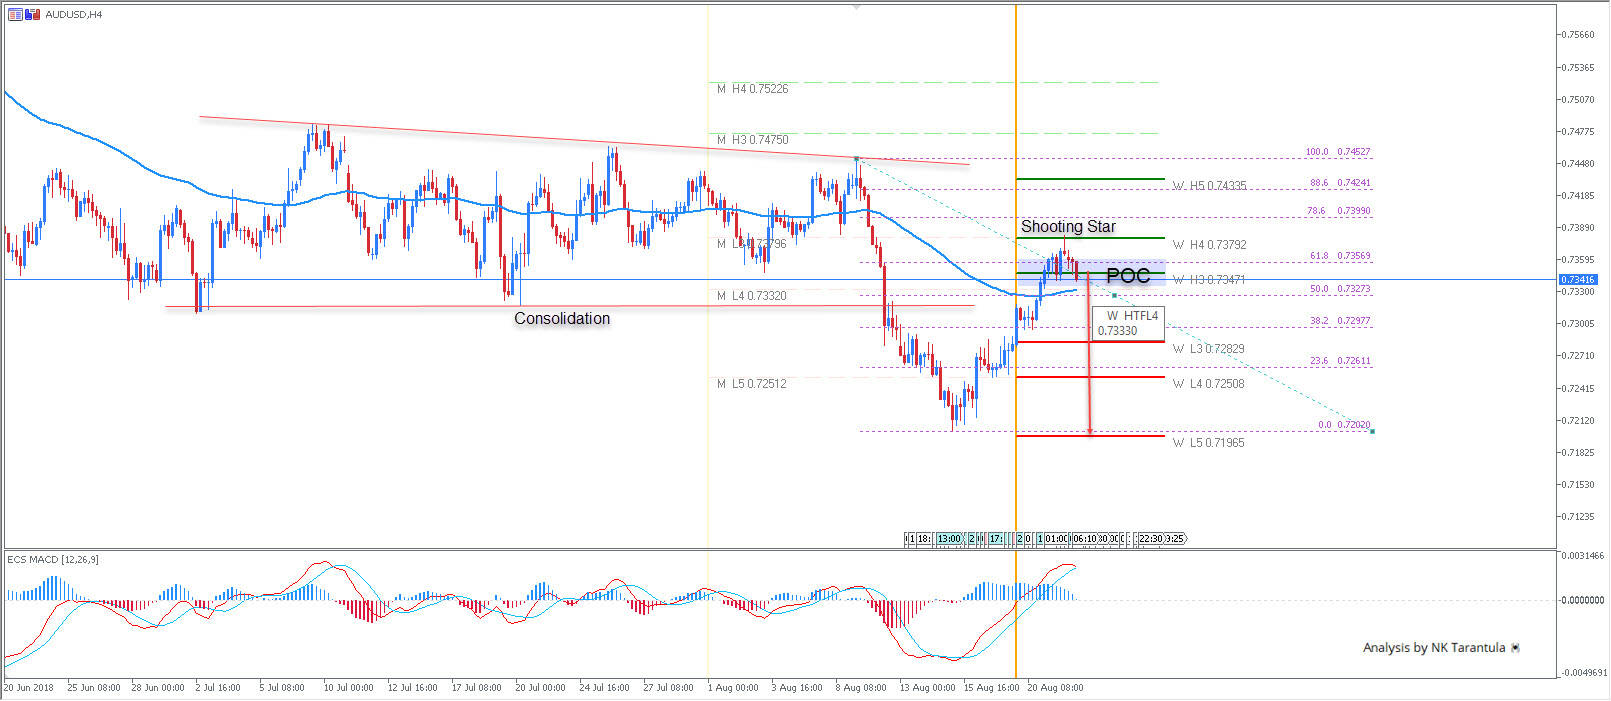 AUD/USD Shooting Star Might End the Consolidation